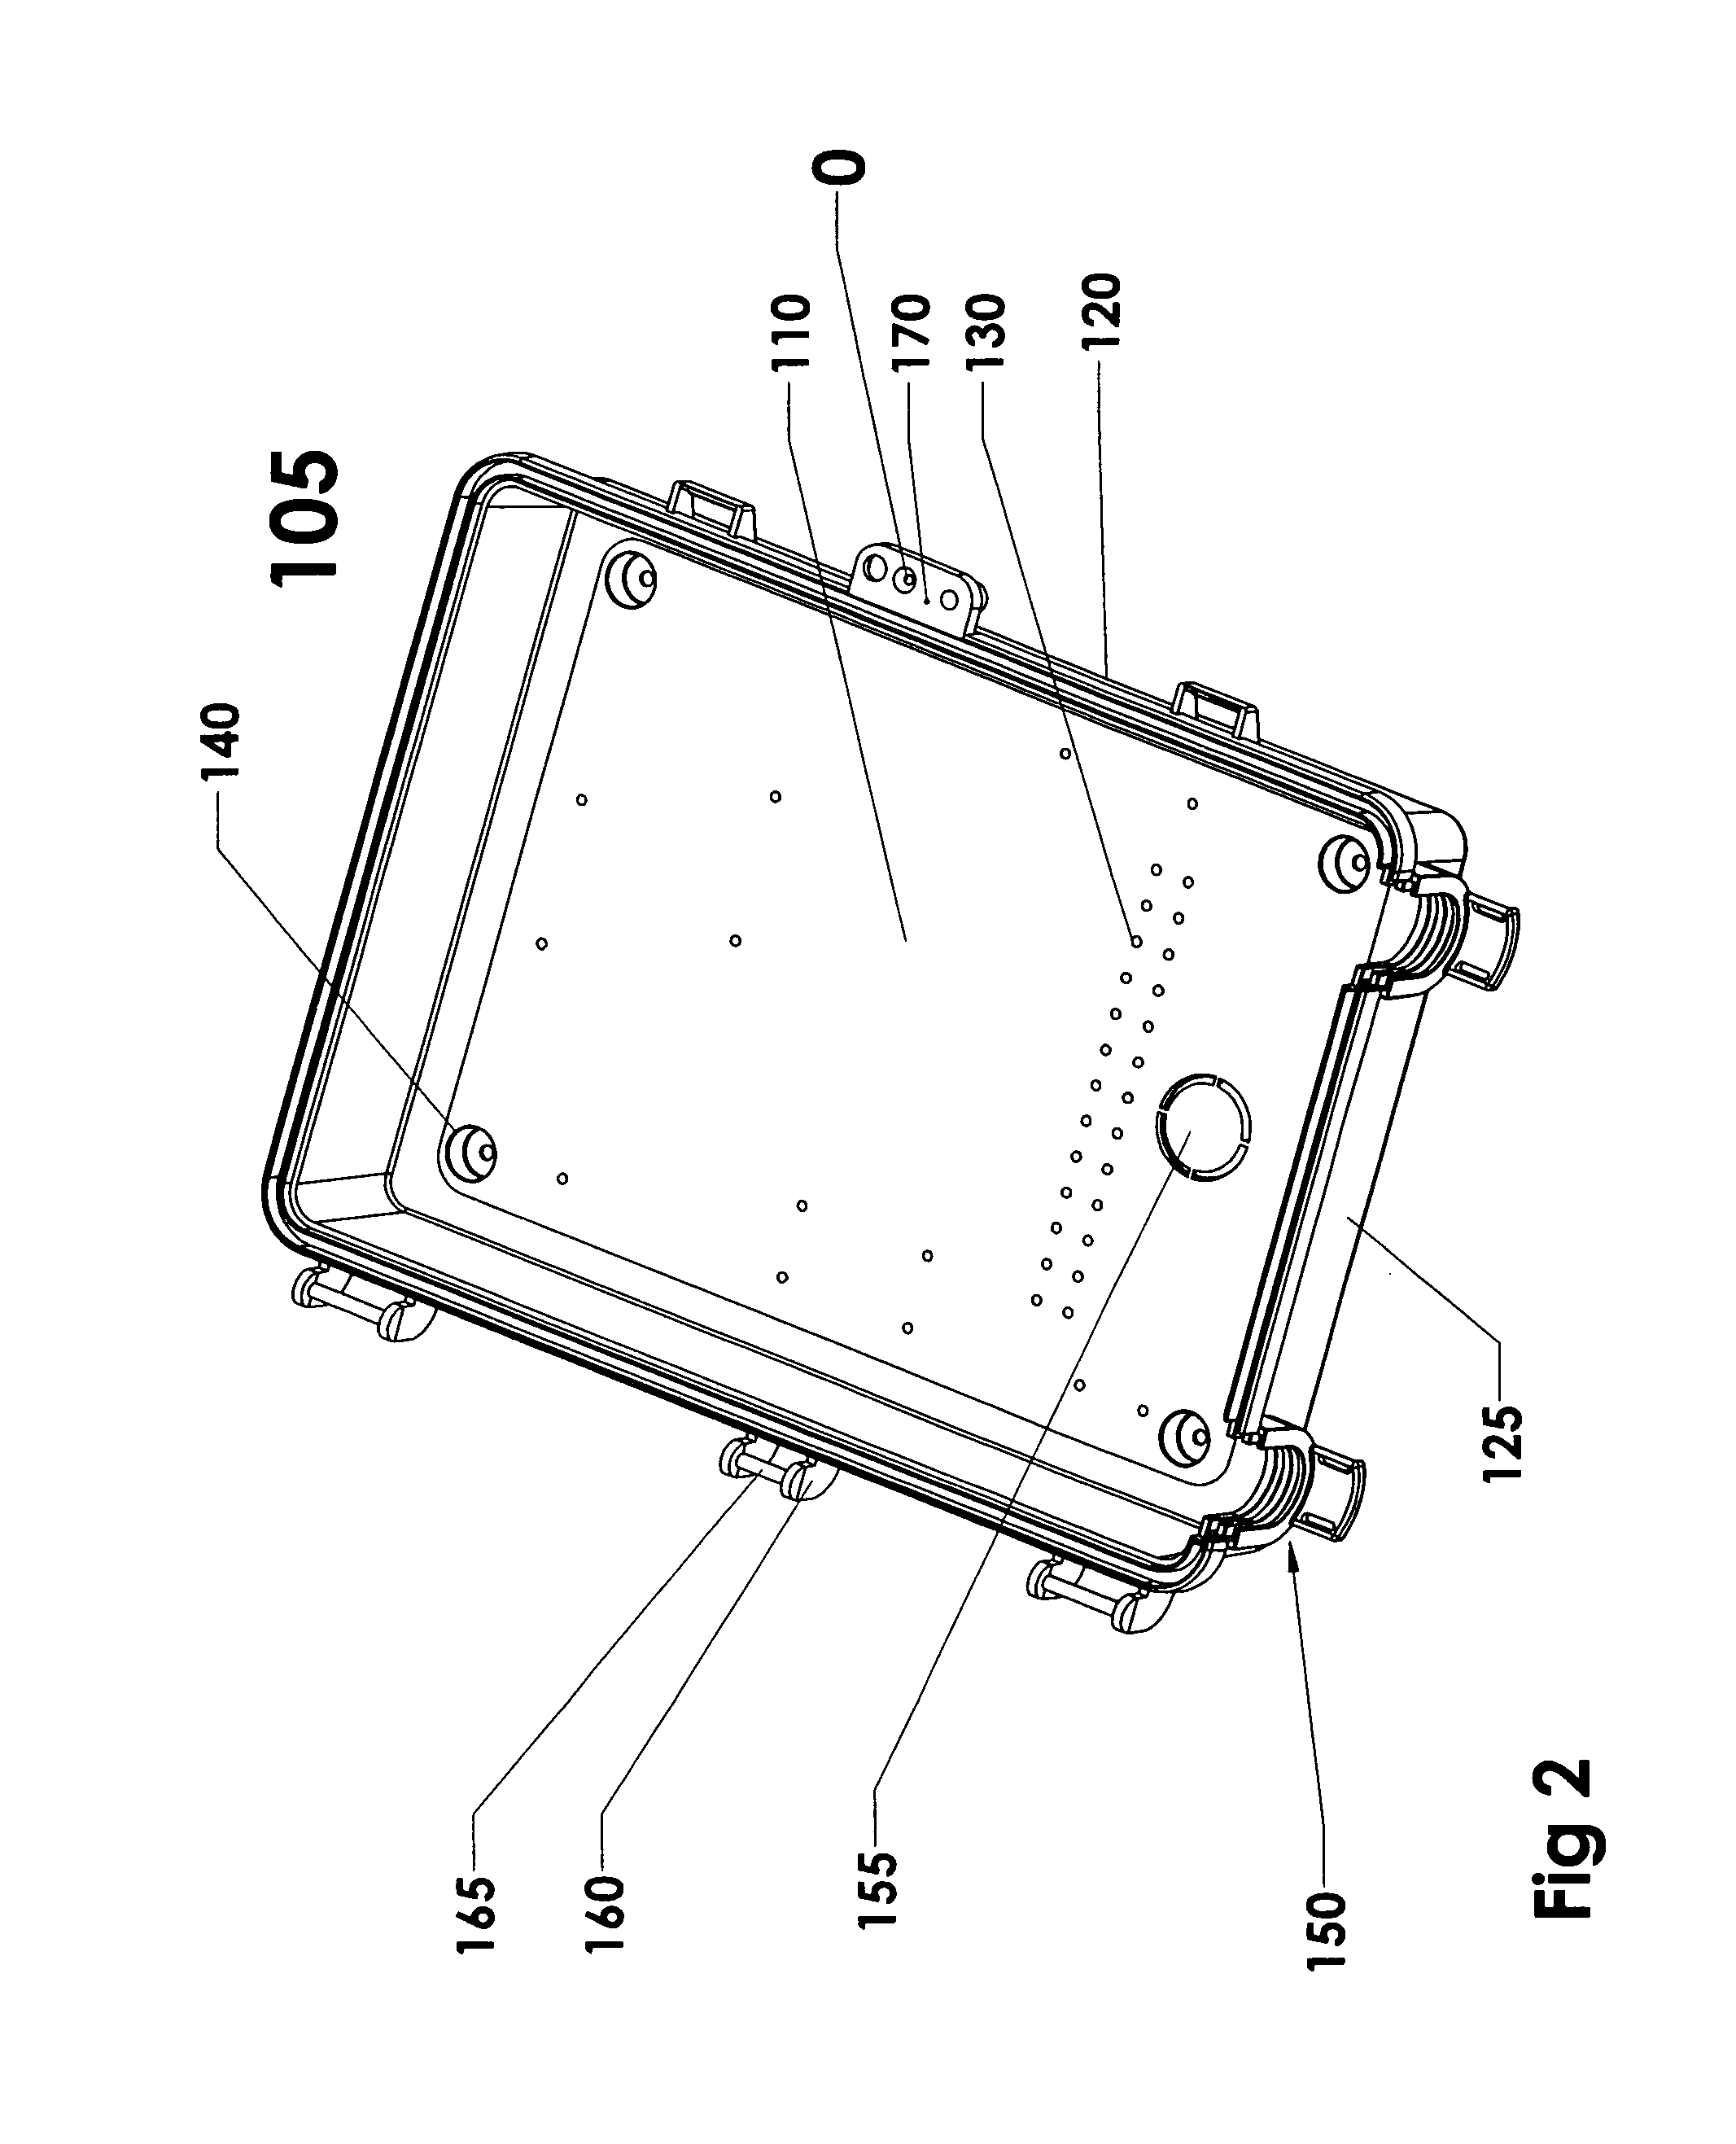 Retaining enclosure for above-ground fiber optic/cable network terminal